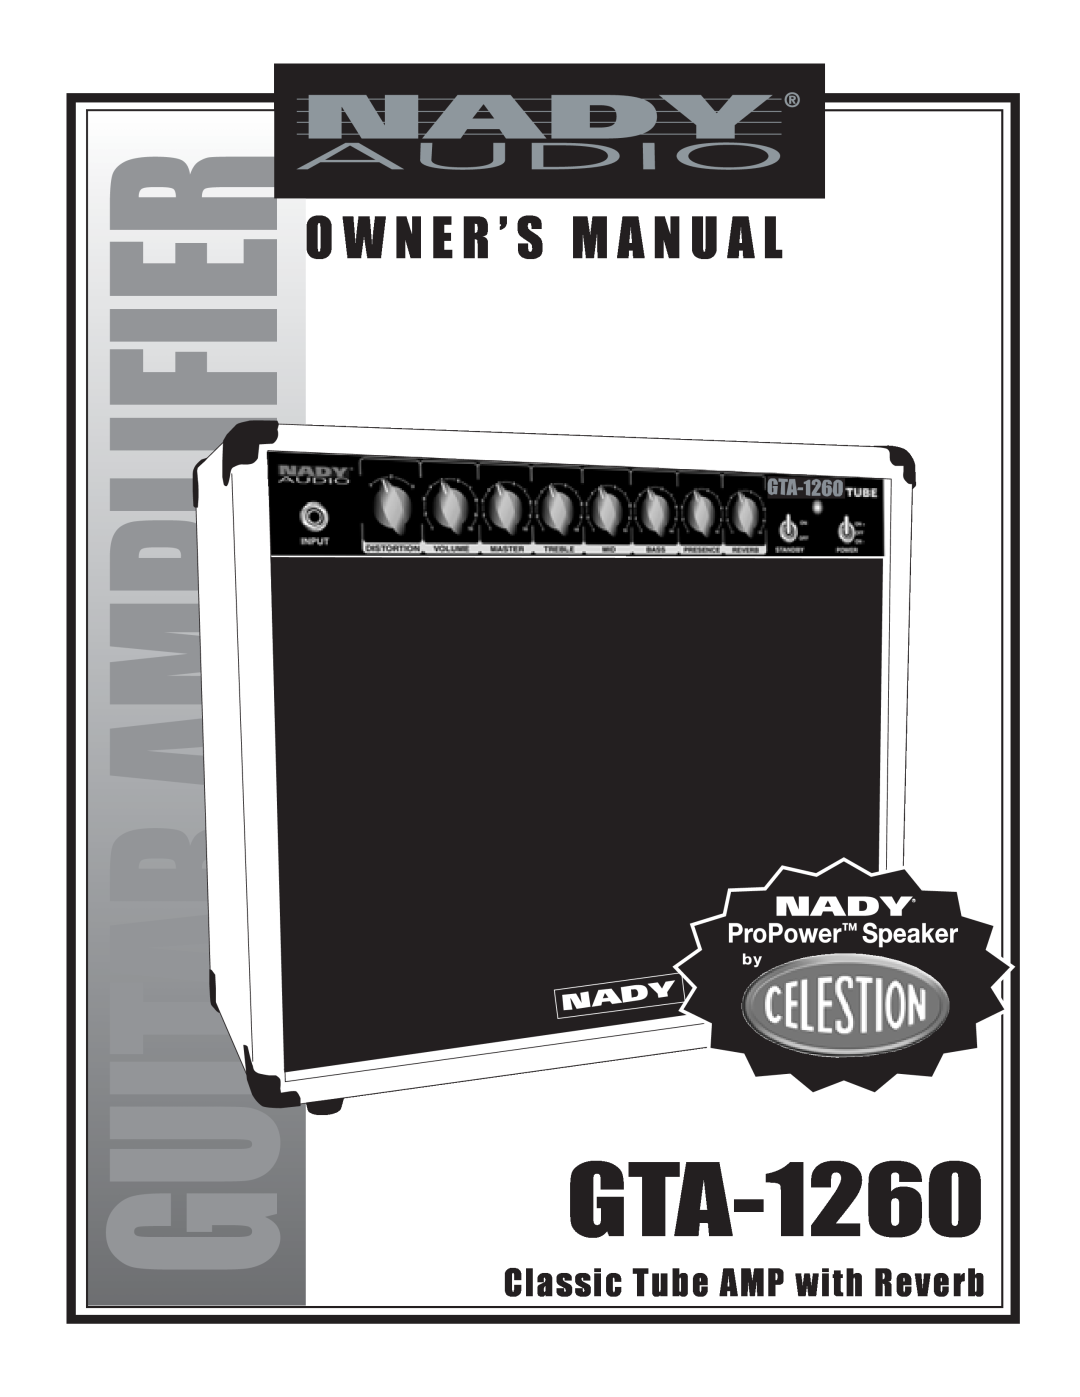 Nady Systems GTA-1260 owner manual Amplifier, Guitar, O W N E R ’ S M A N U A L, Classic Tube AMP with Reverb 